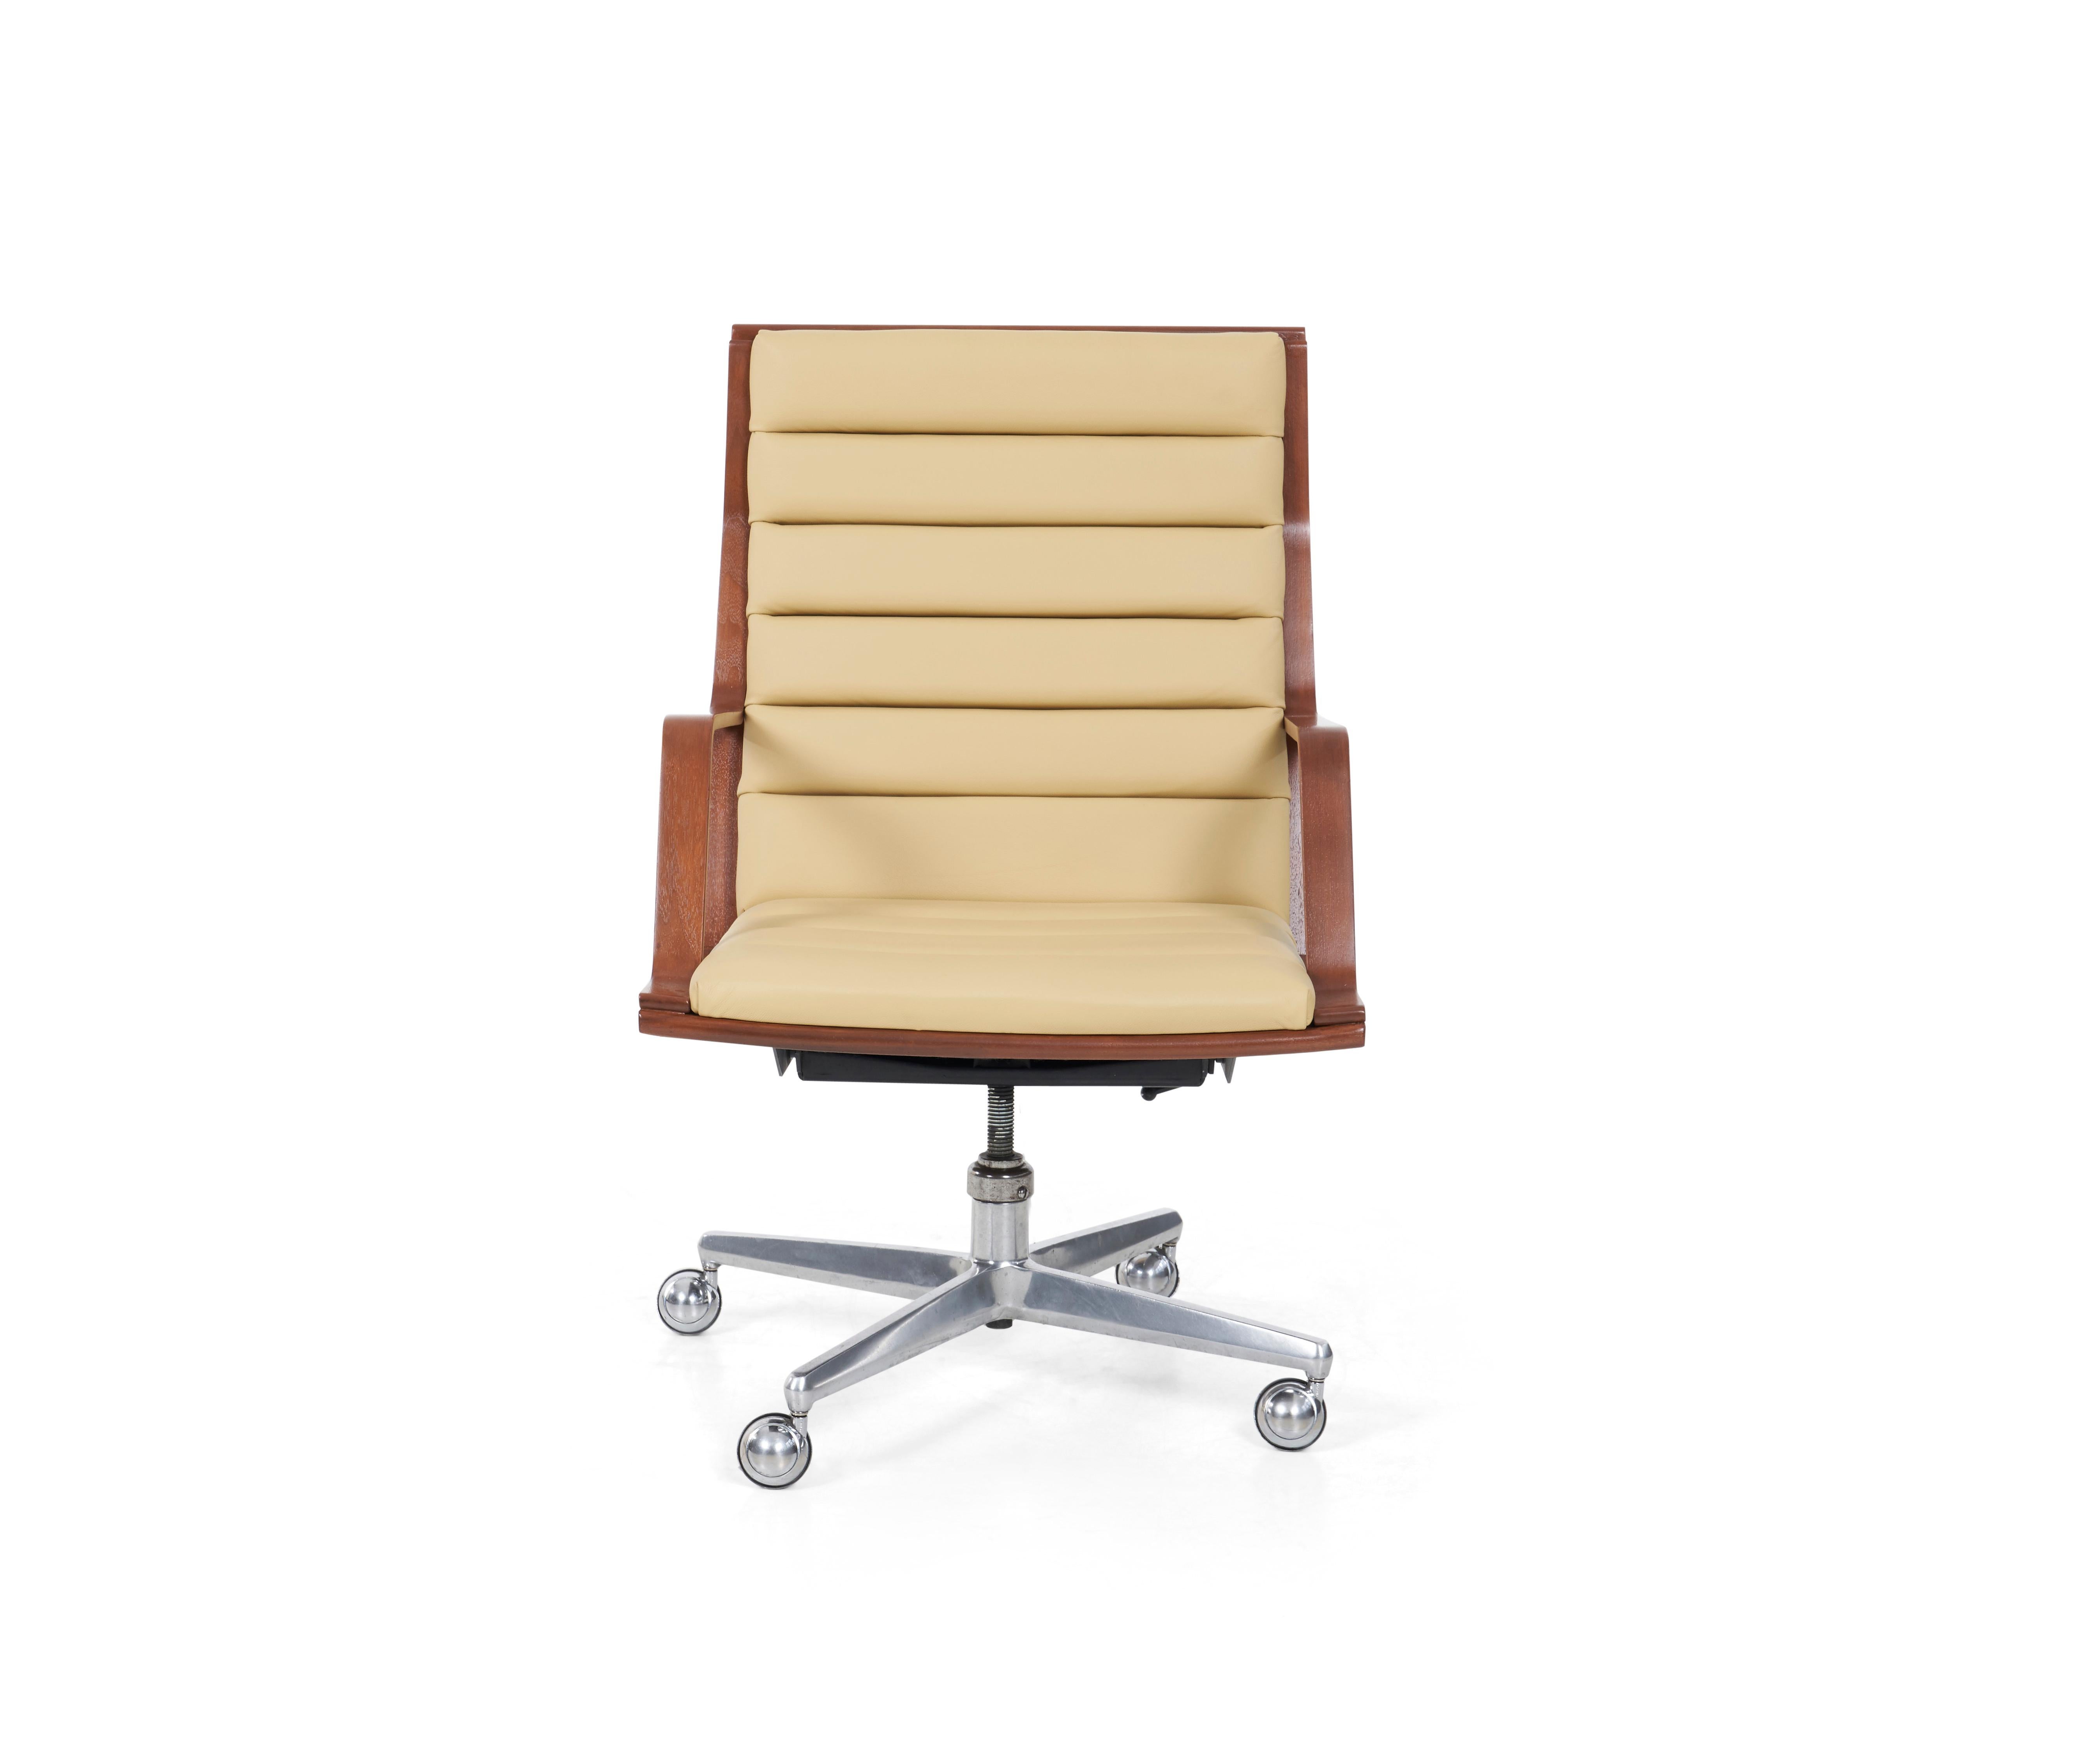 Wormley for Dunbar Desk chair, Channel seat and back Spinneybeck leather with mahogany woof frame, cast aluminum swivel base on 4 metal casters chairs.
